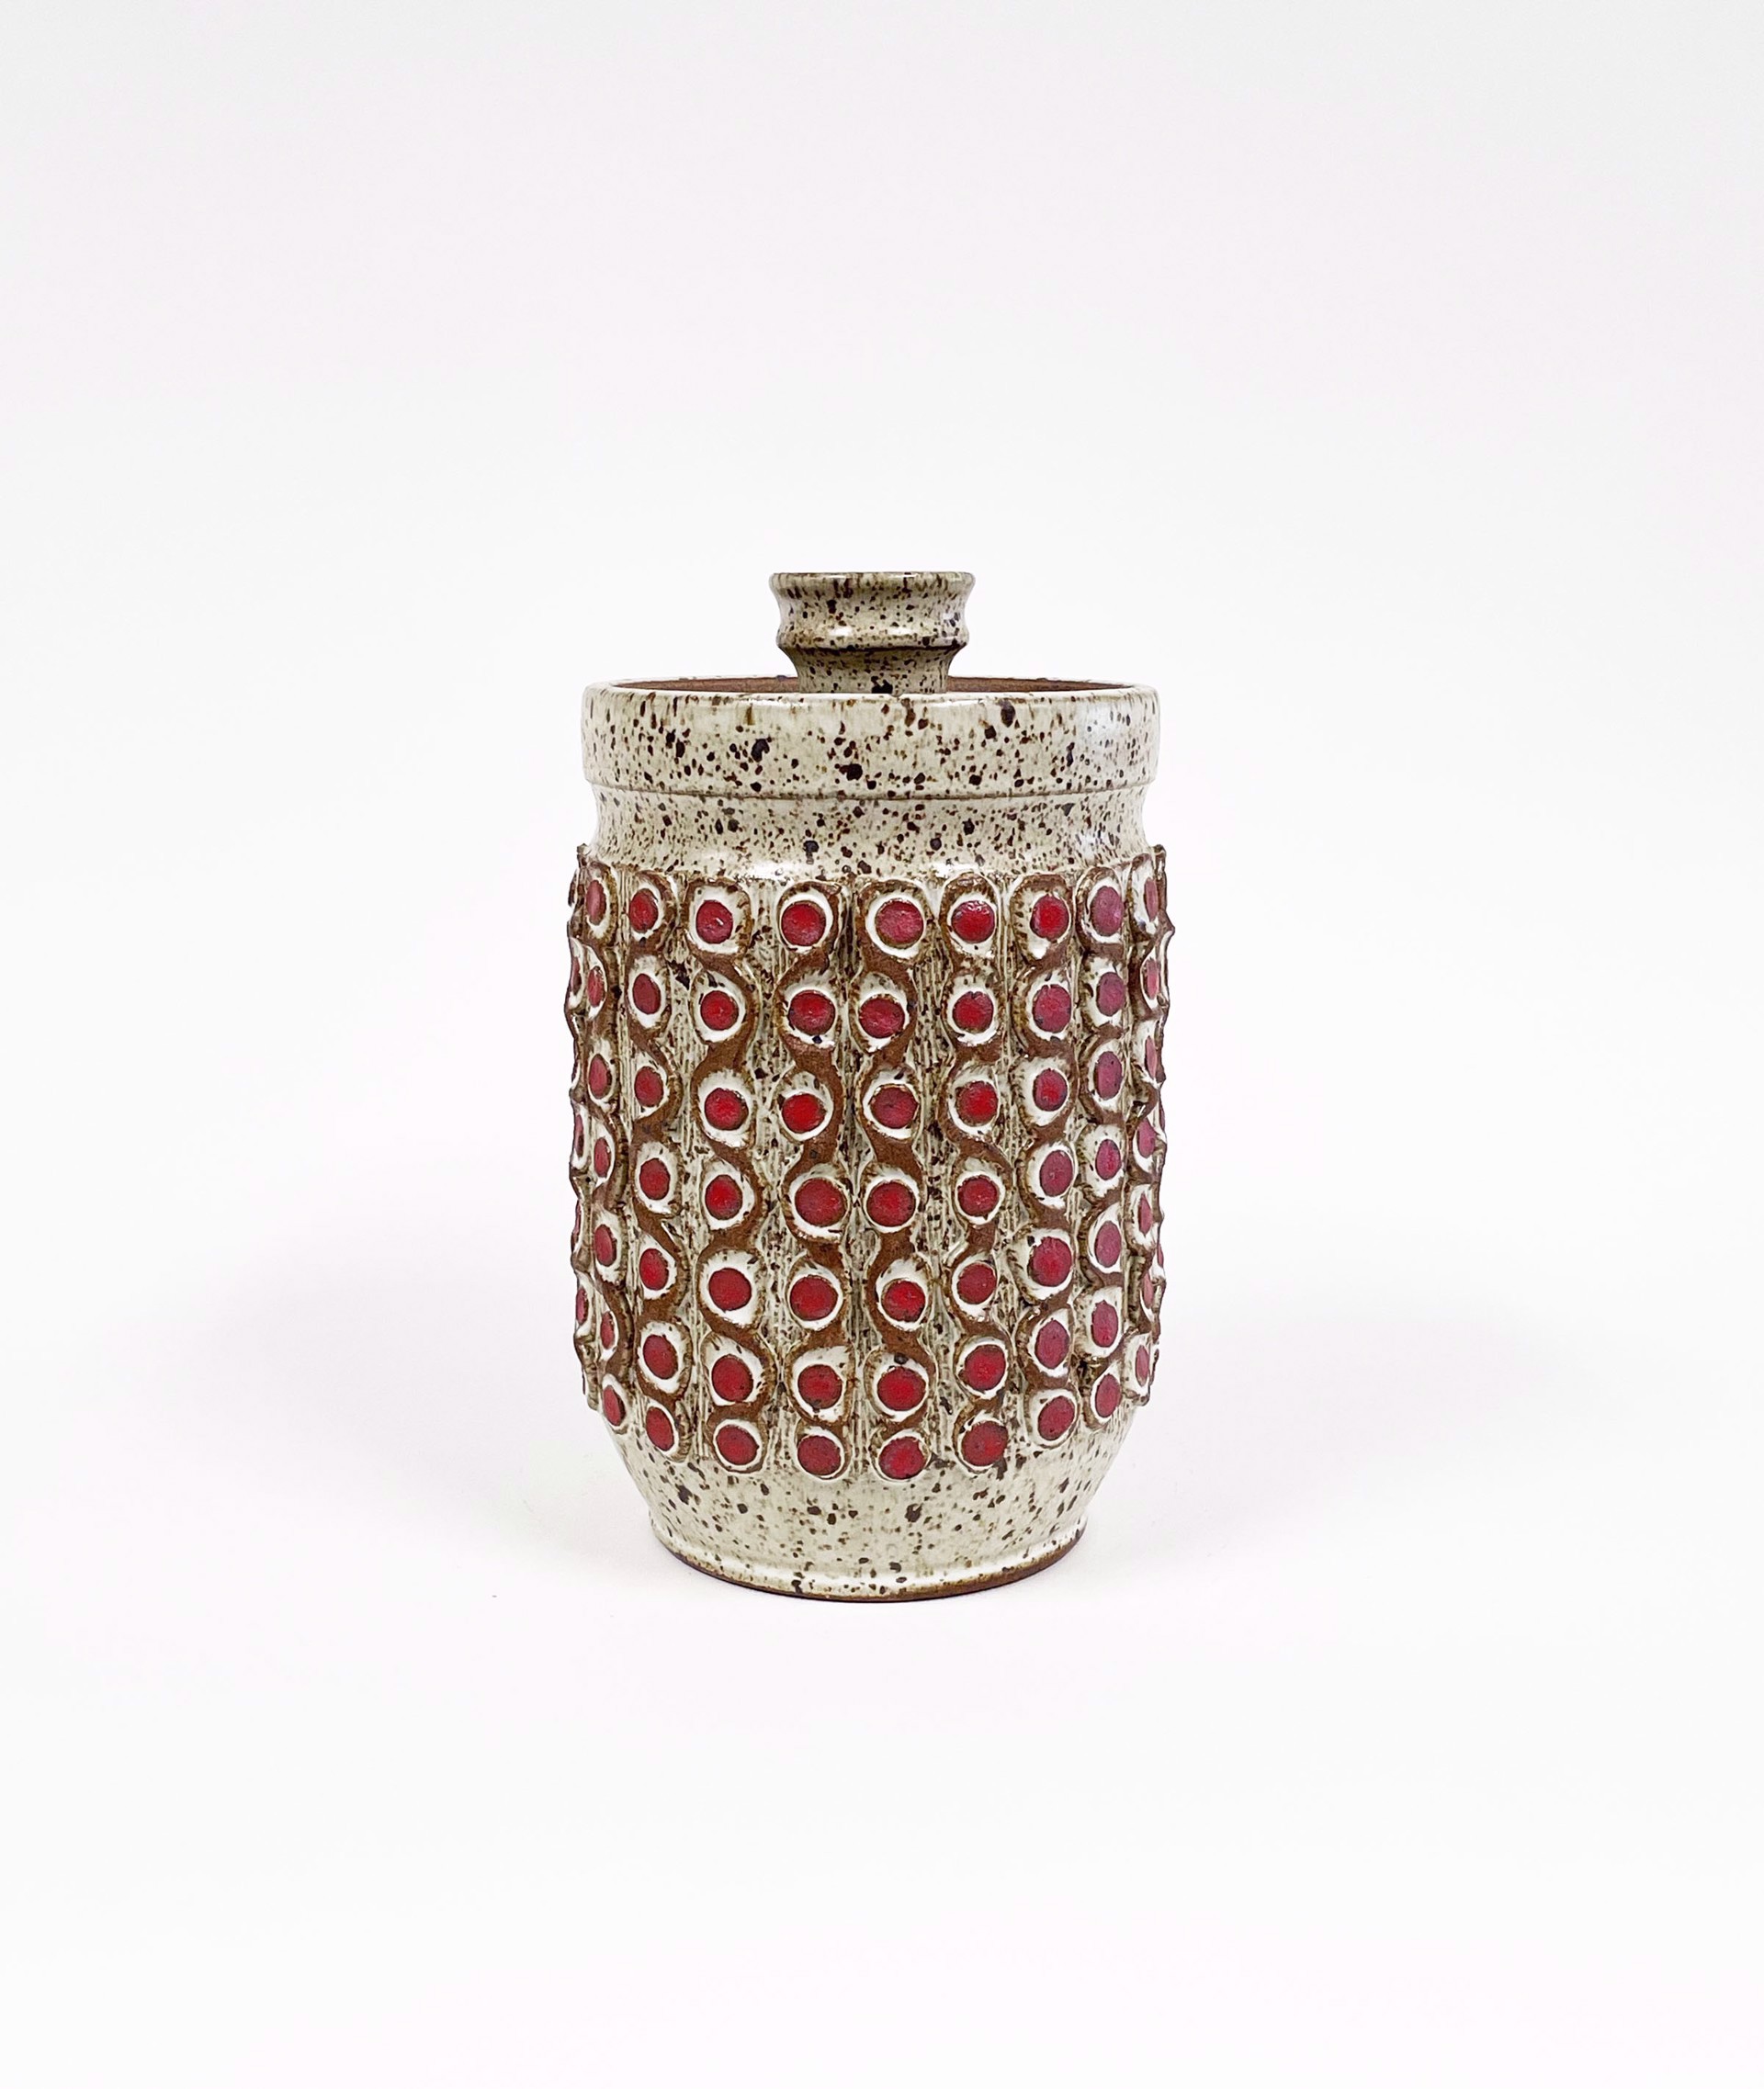 Textured Lidded Vessel 1.2 by Kat and Roger